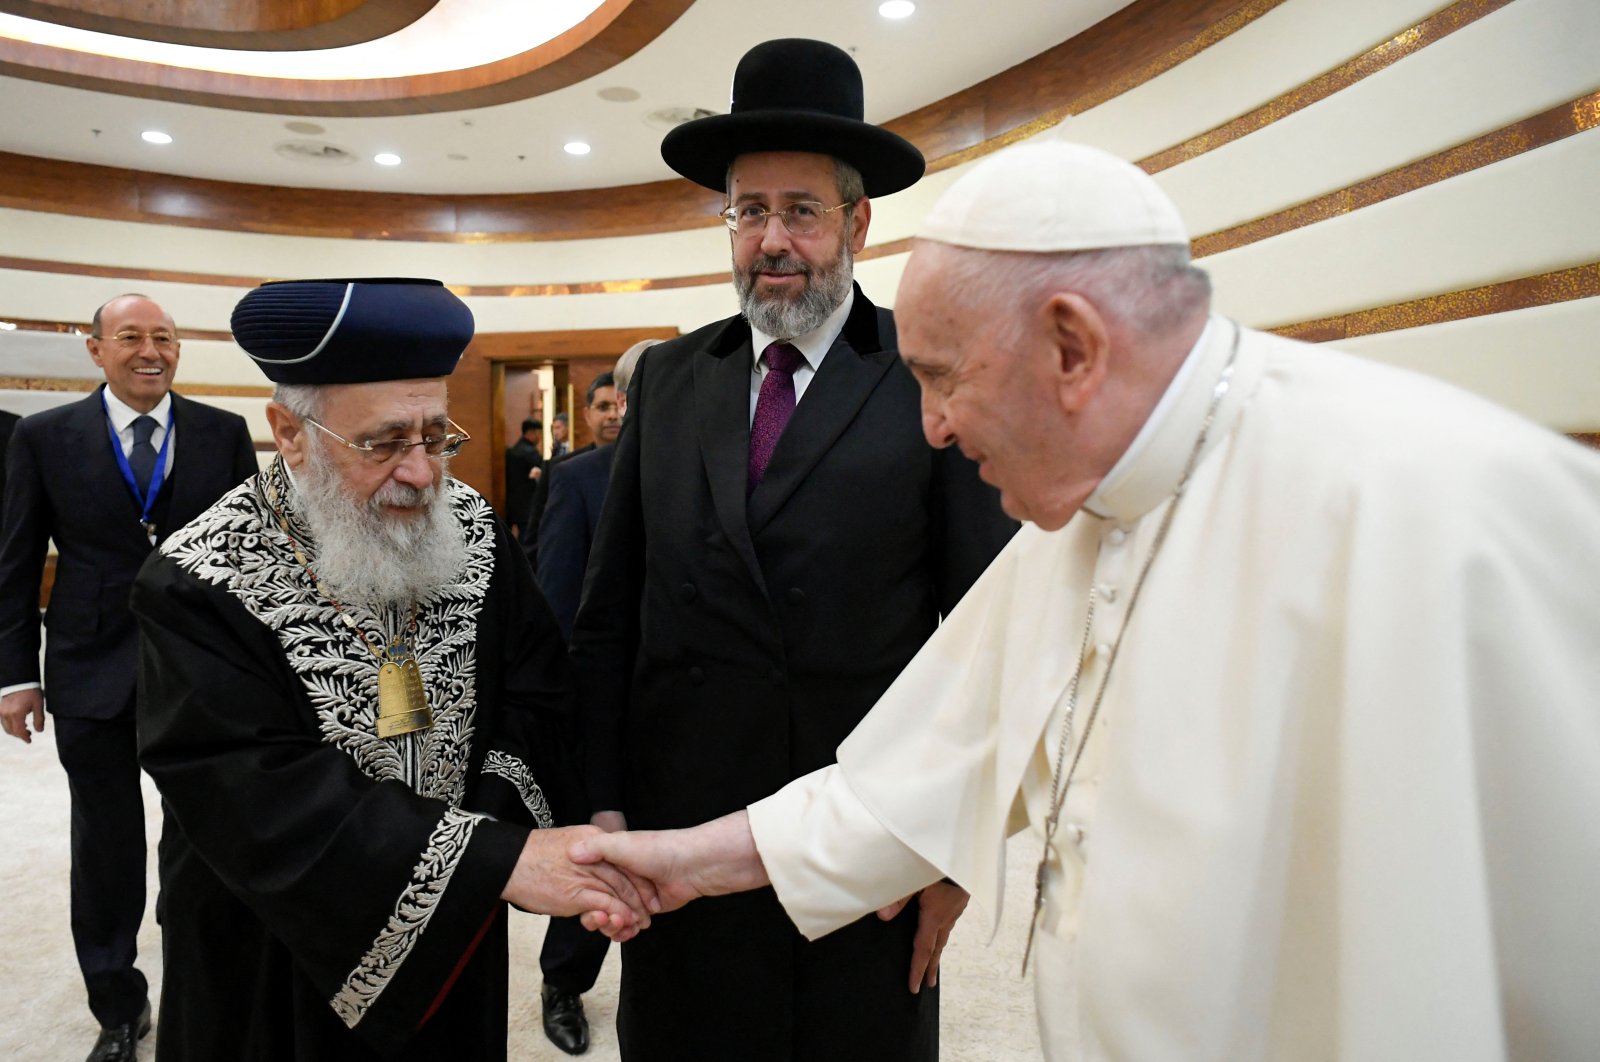 Pope Francis meets Israel&#039;s Chief Sephardic Rabbi Yitzhak Yosef on the day of the VII Congress of Leaders of World and Traditional Religions at the Palace of Independence in Nur Sultan, Kazakhstan, Sept. 14, 2022. (Vatican Media via Reuters)